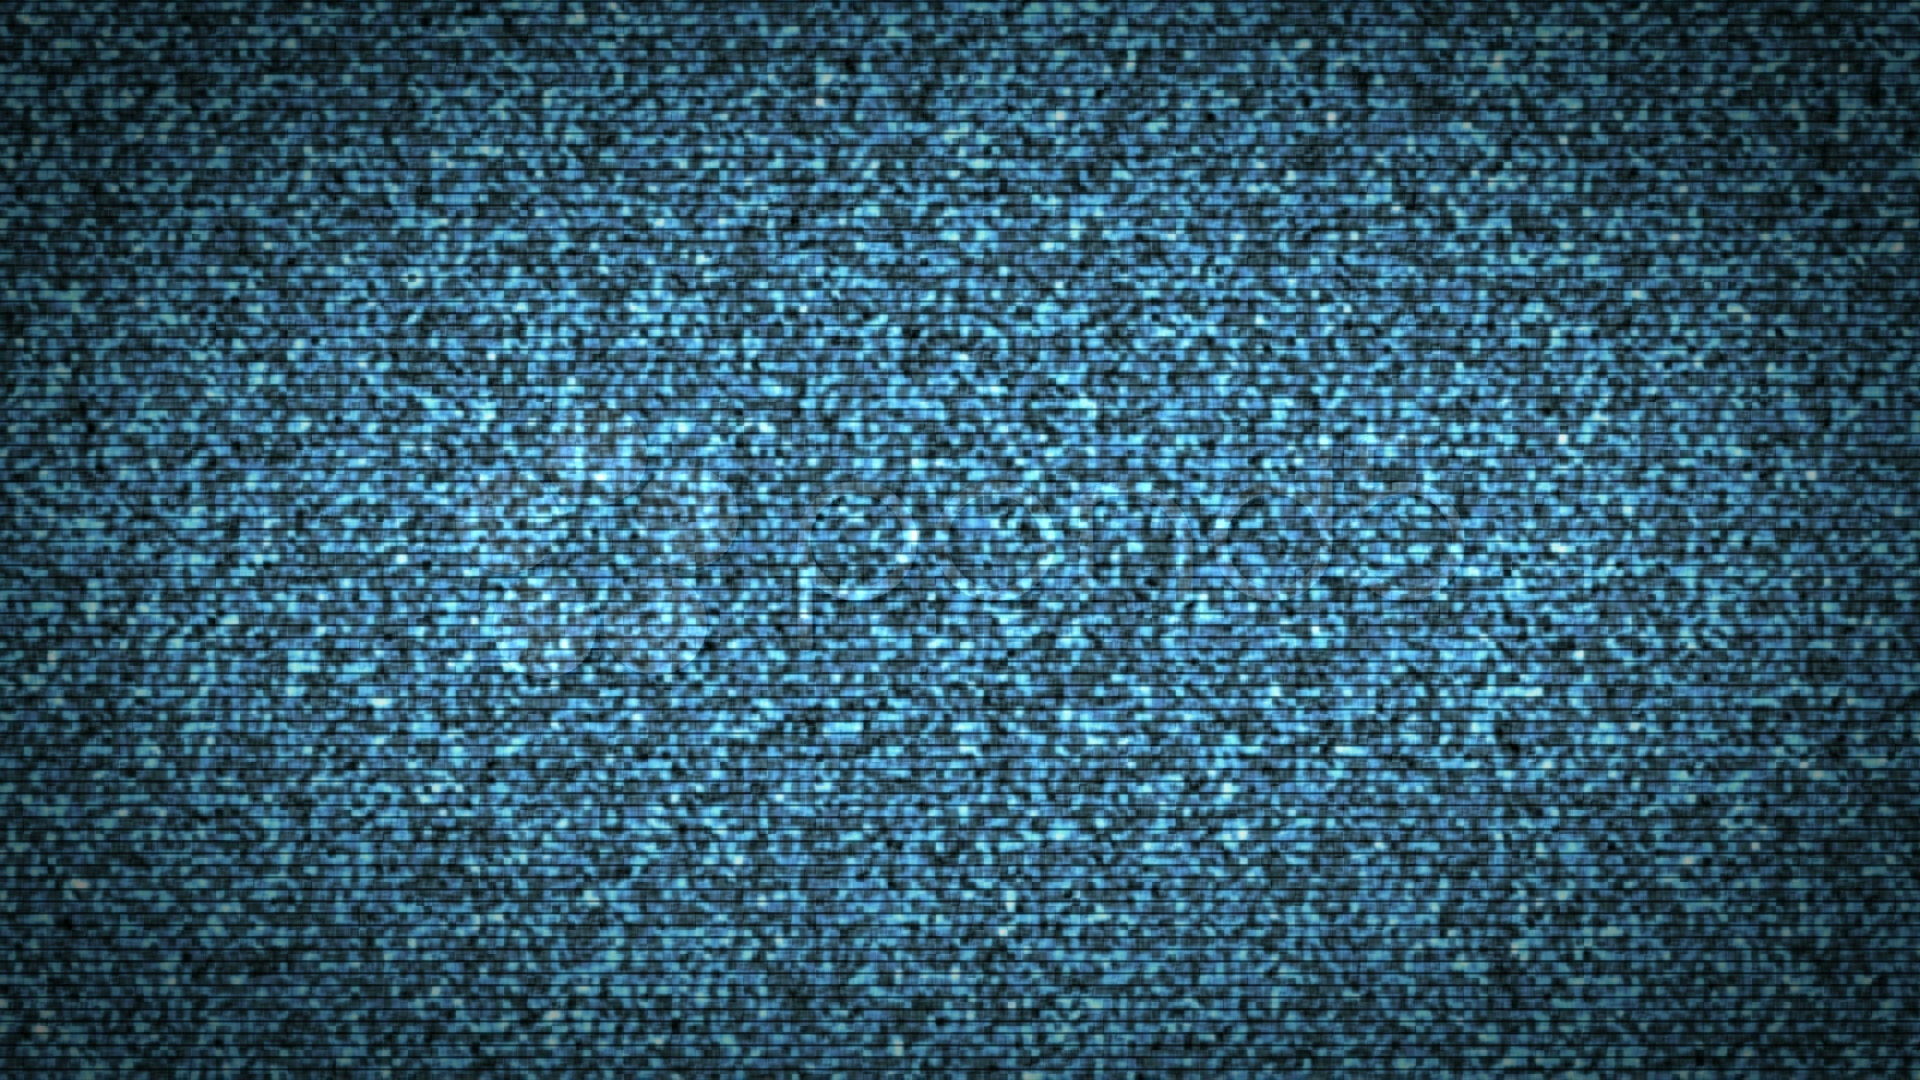 noise wallpaper,blue,pattern,green,turquoise,text